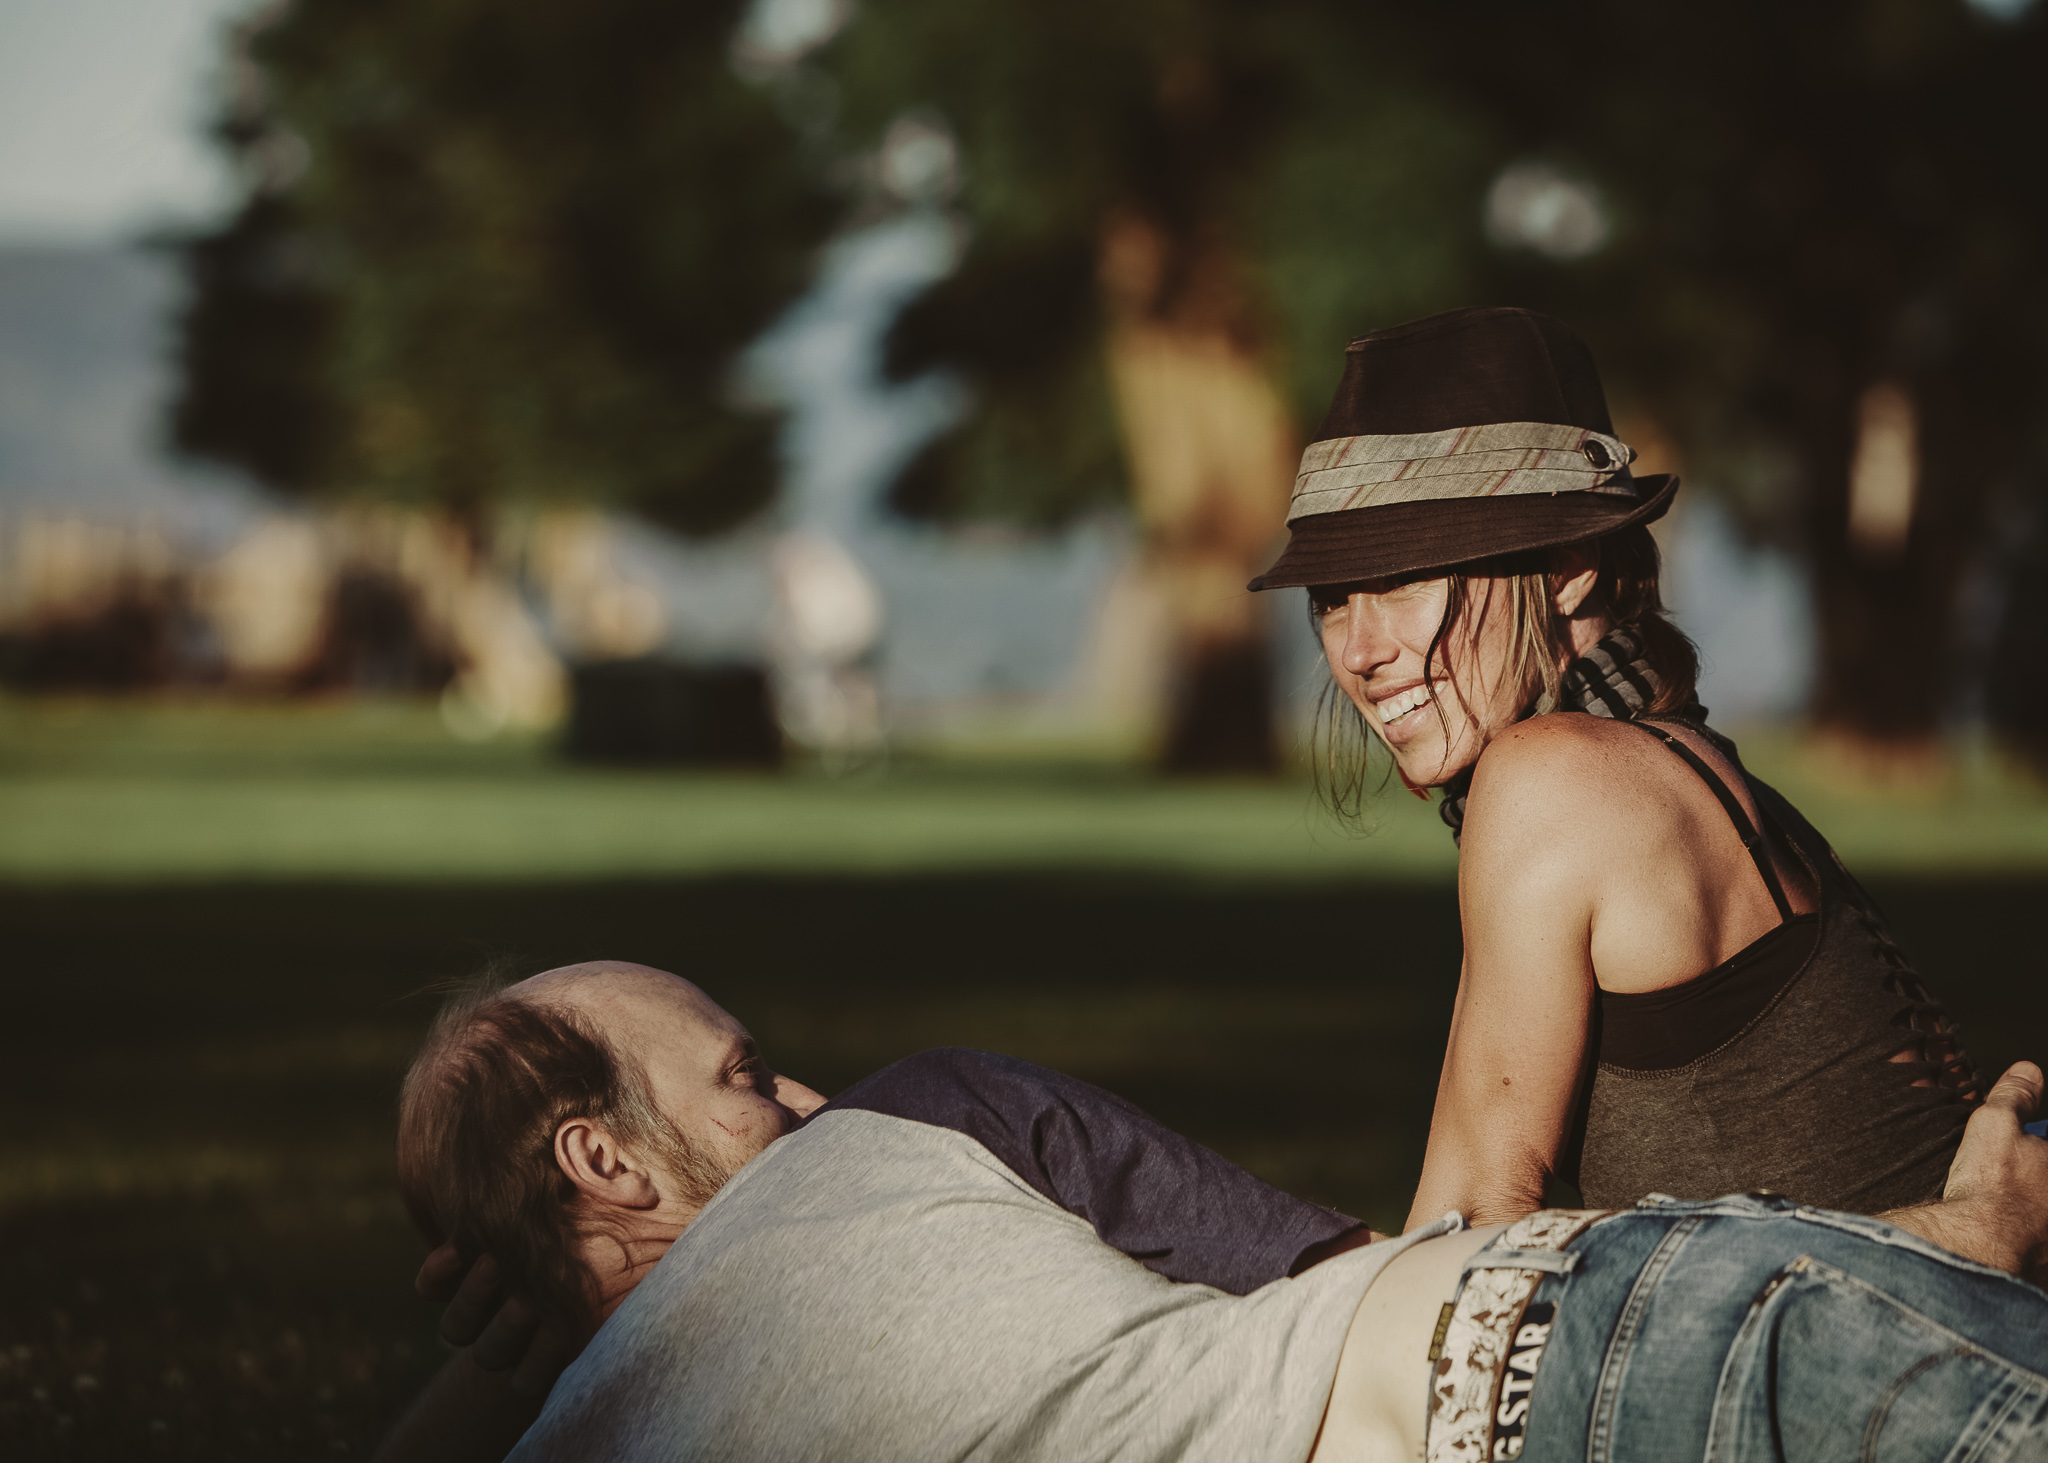 man lays on grass beside smiling woman with hat on